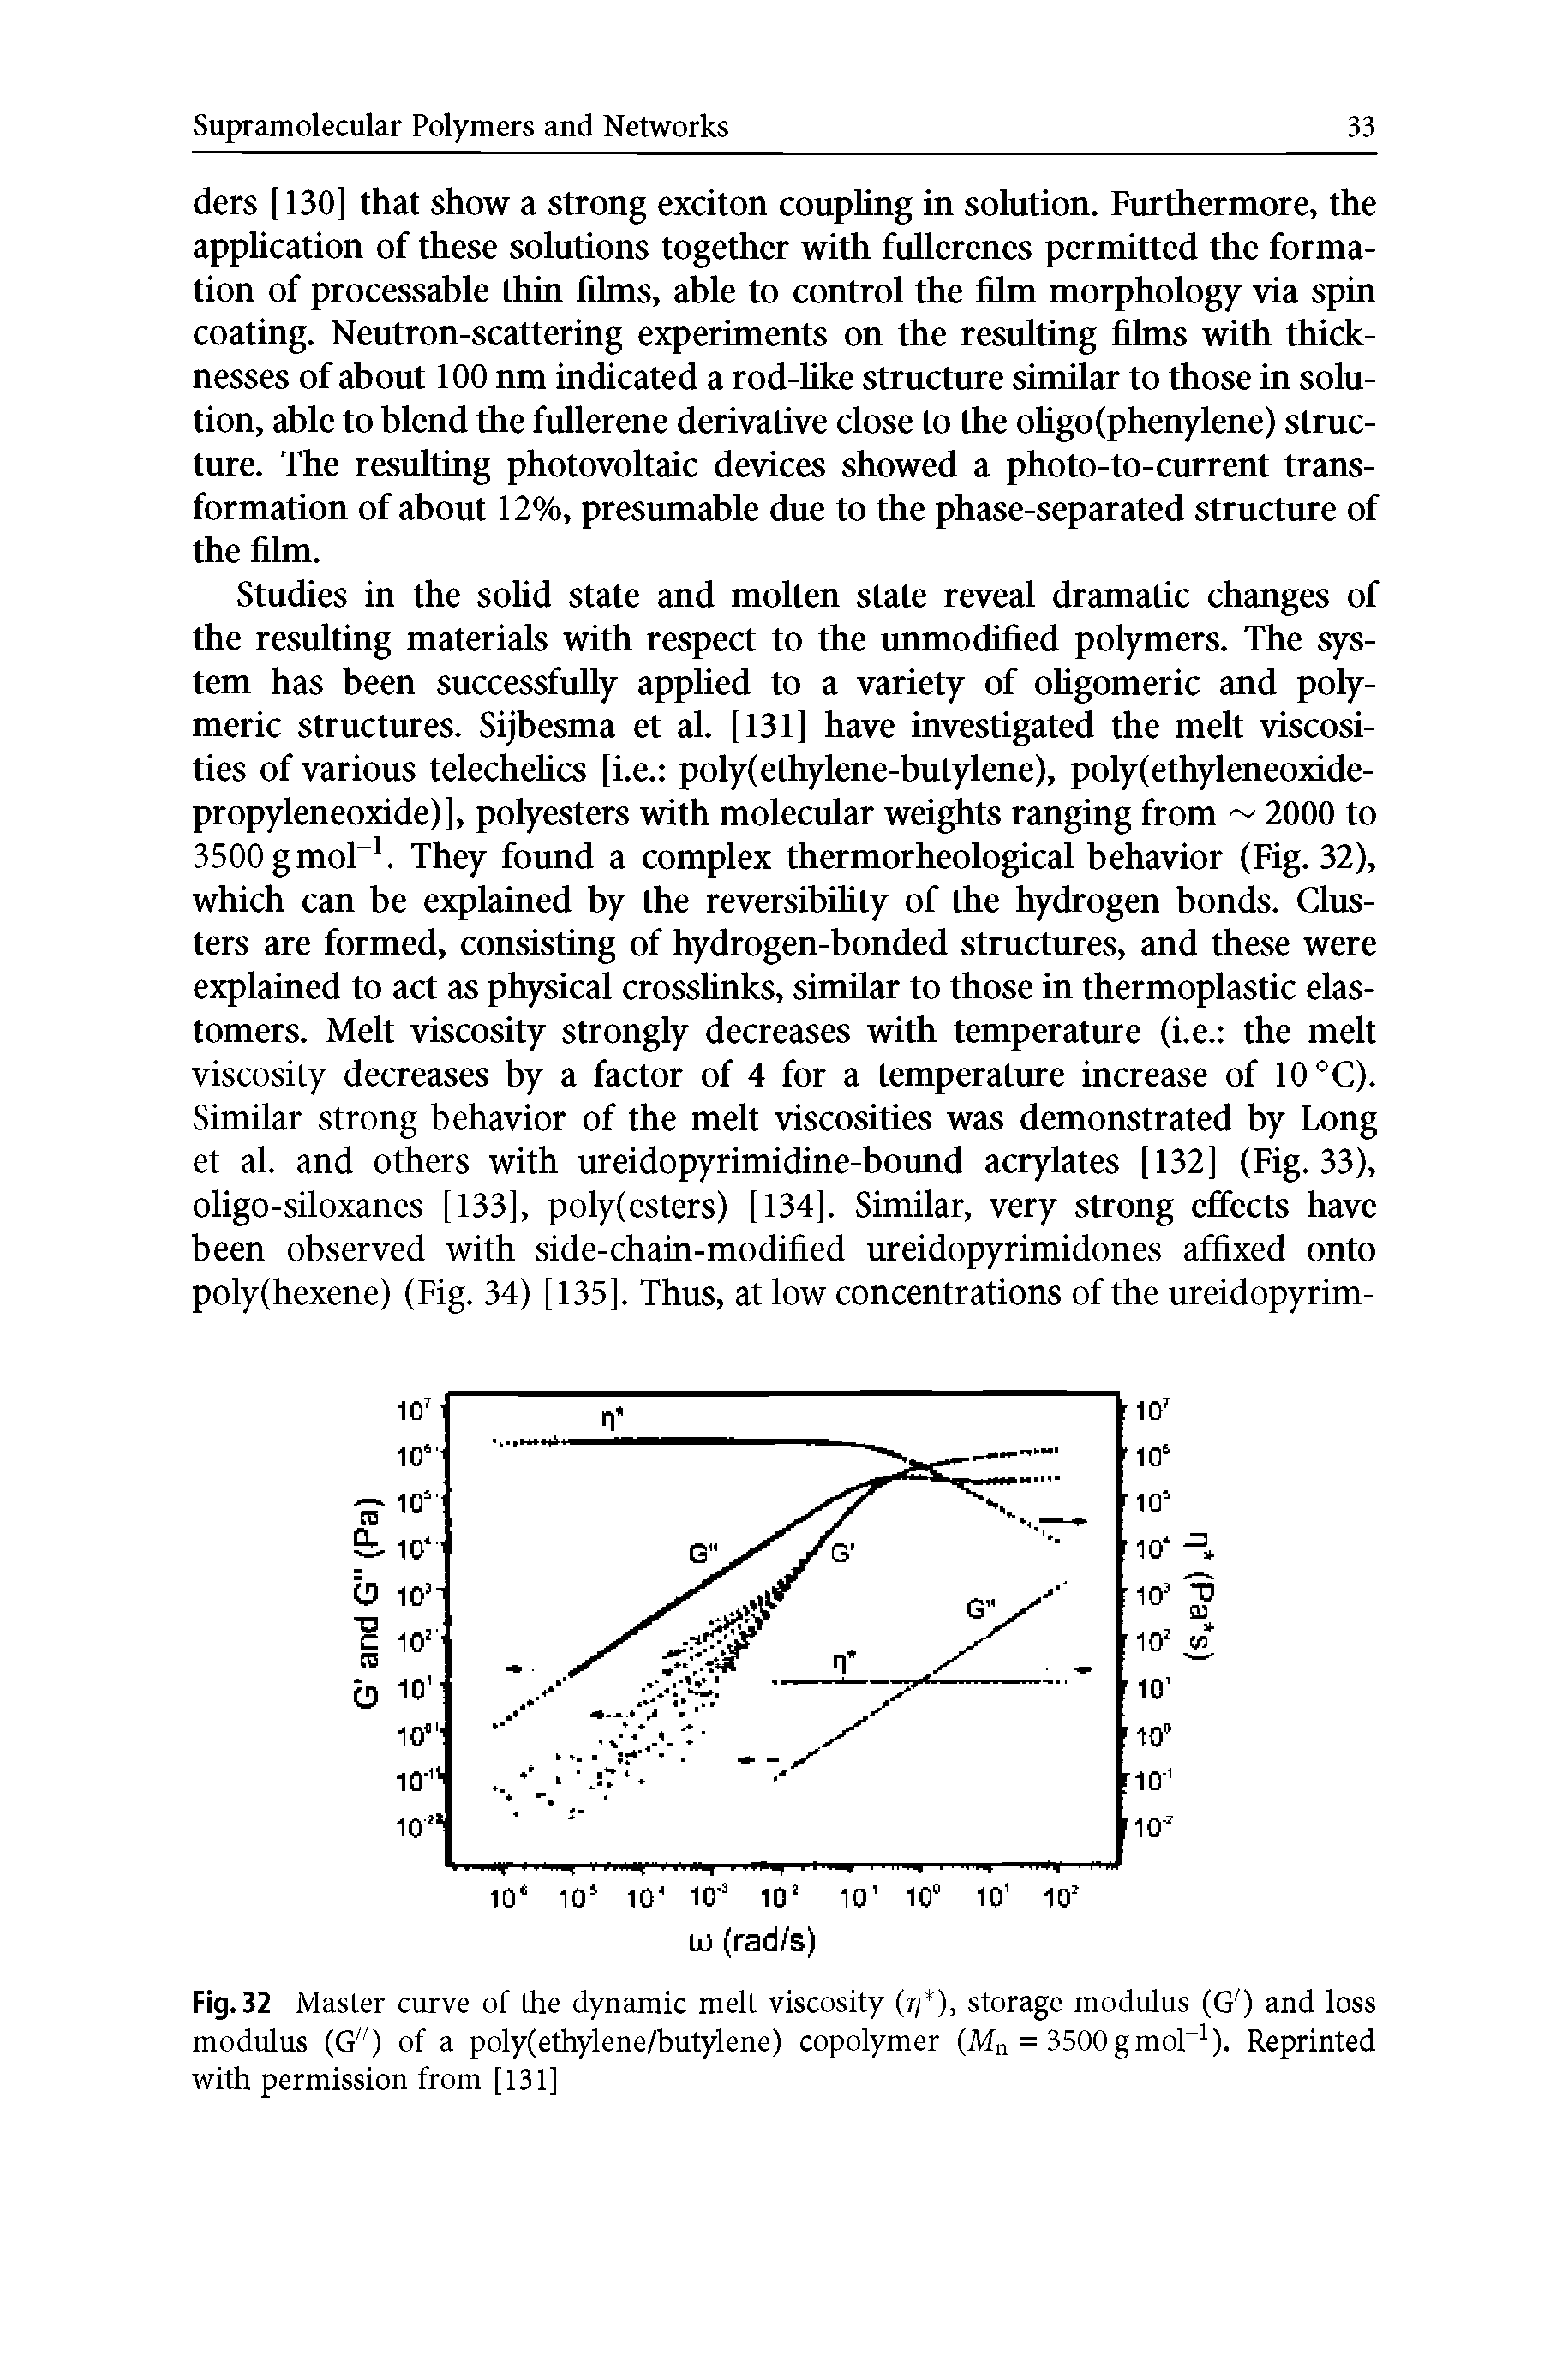 Fig. 32 Master curve of the dynamic melt viscosity (/] ), storage modulus (G ) and loss modulus (G") of a poly(ethylene/butylene) copolymer (Mn = 3500gmol ). Reprinted with permission from [131]...